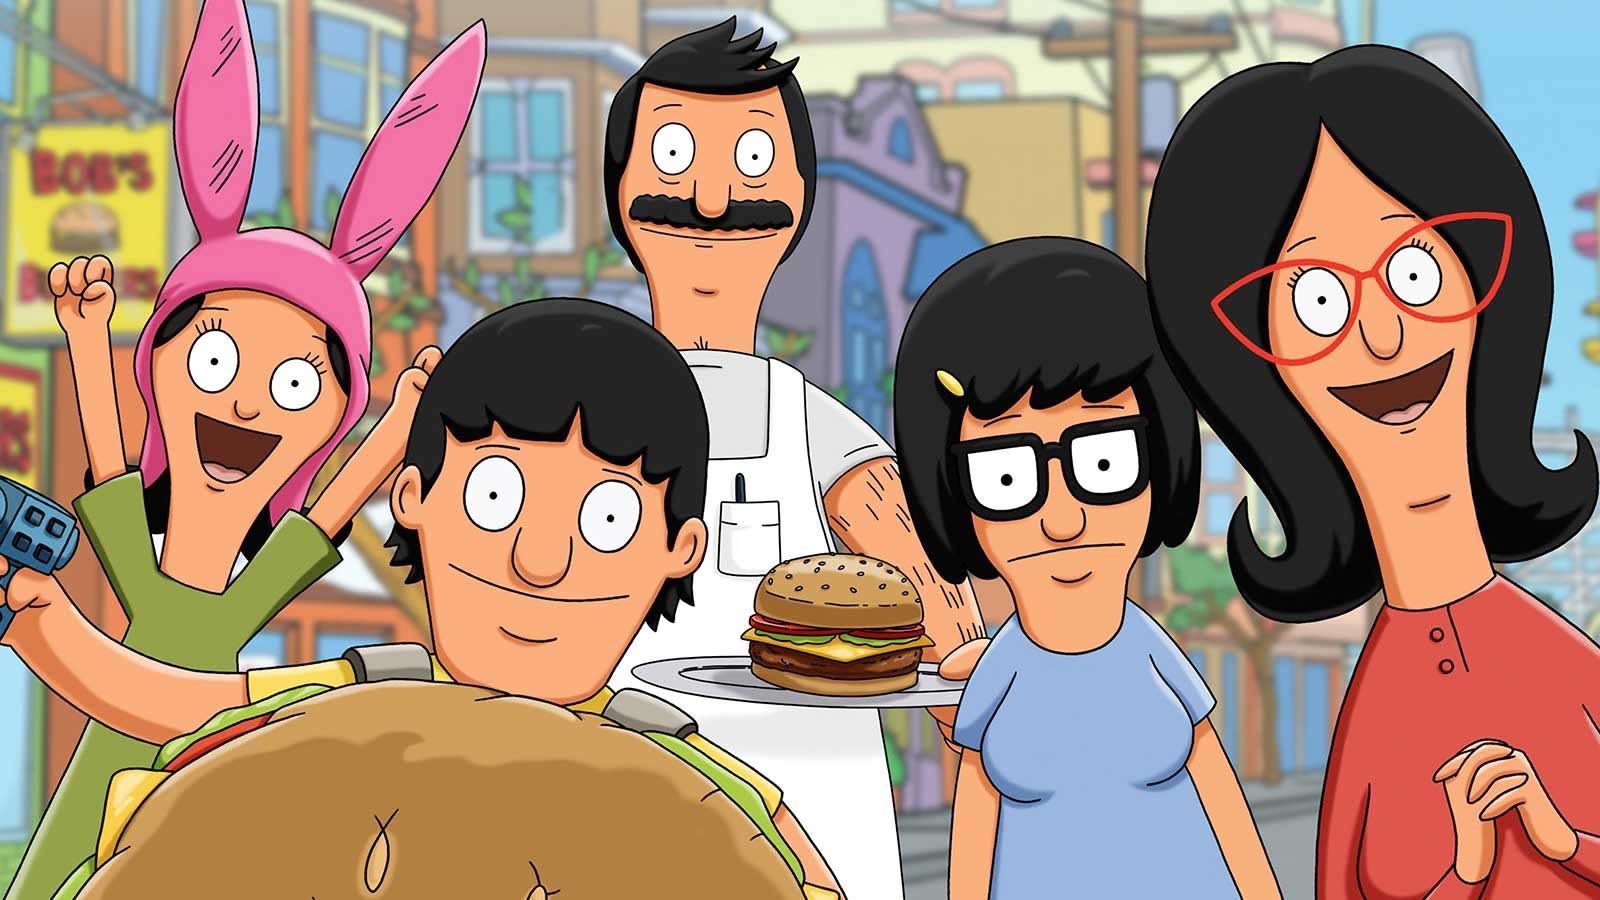 Head Over To Ocean Avenue For The Bobs Burgers Movie Being Released In 2022